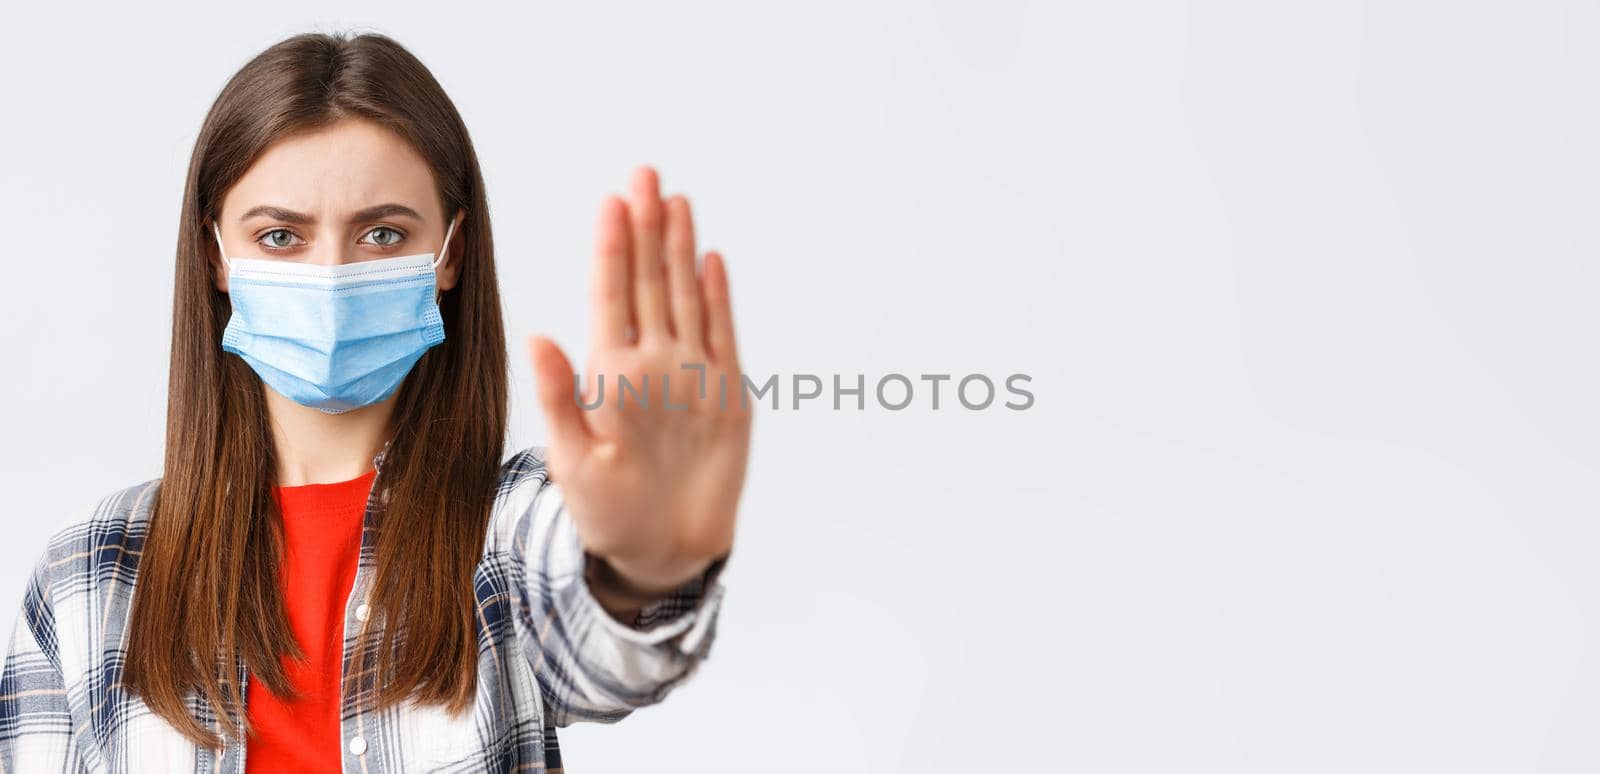 Coronavirus outbreak, leisure on quarantine, social distancing and emotions concept. Close-up of serious determined young woman want prevent or stop smth, stretch hand in restriction or warning.